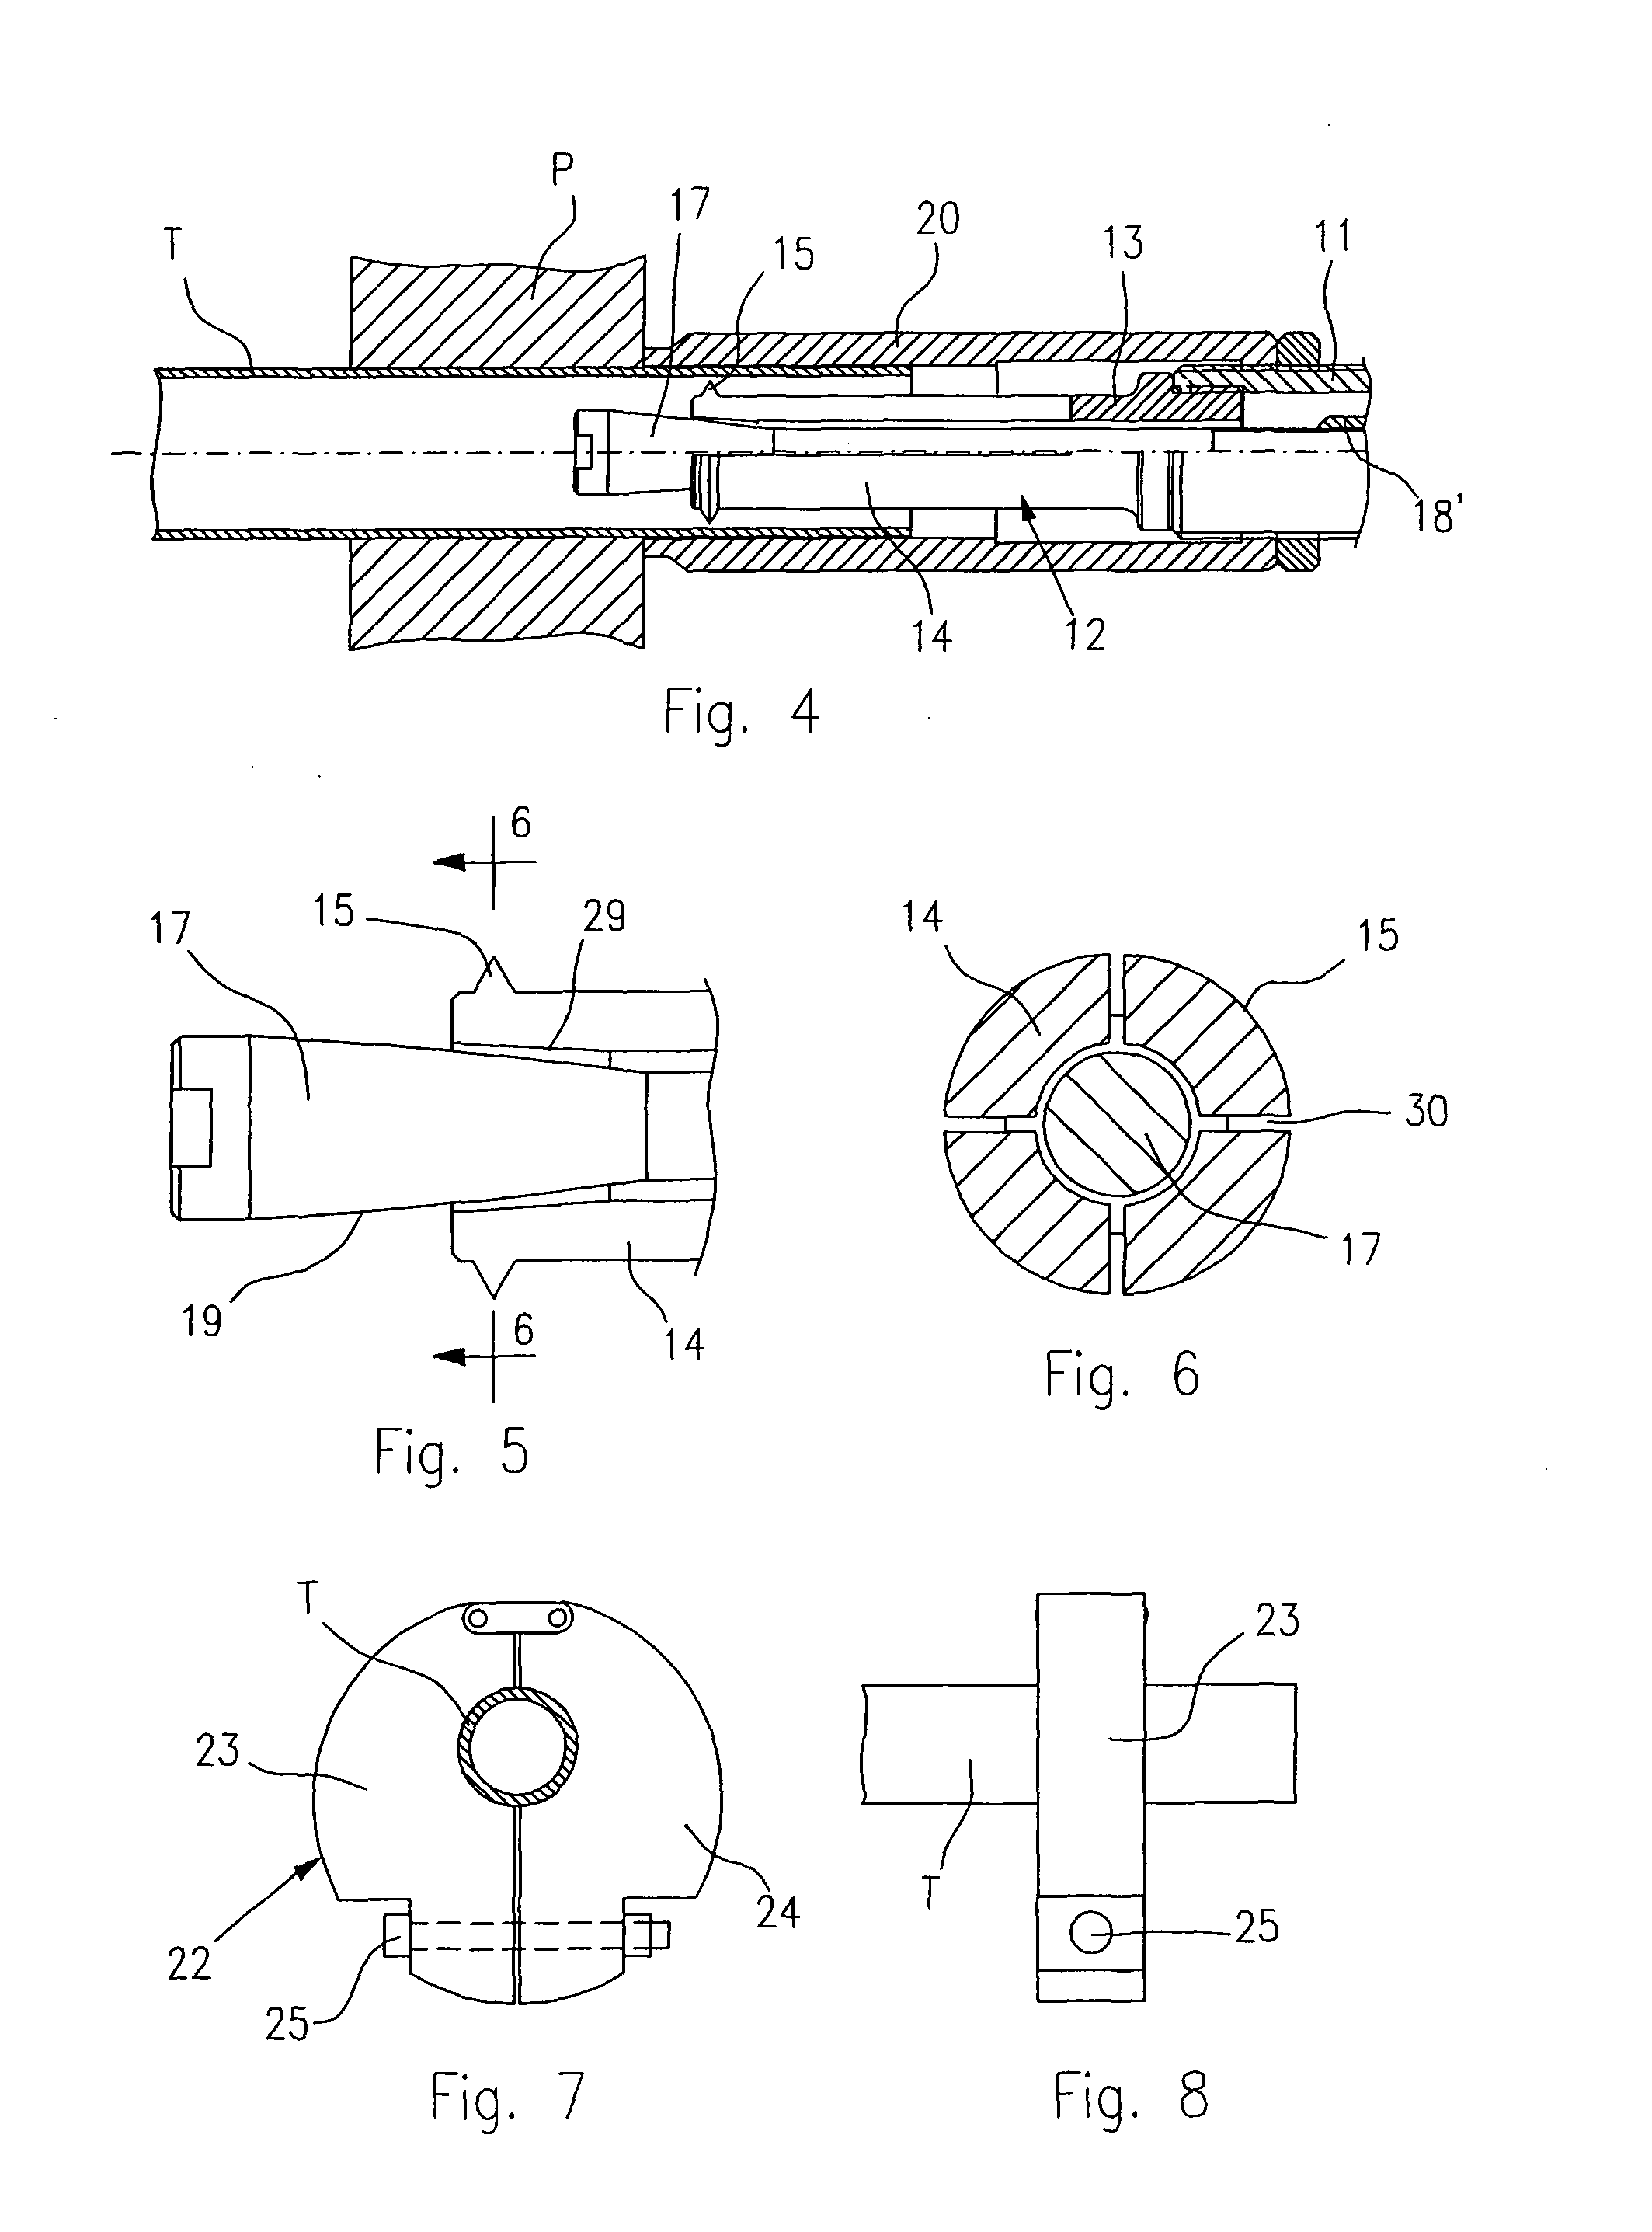 Multipurpose Expansion Work Device For The Cutting Or Expansion Of Metal Tubes